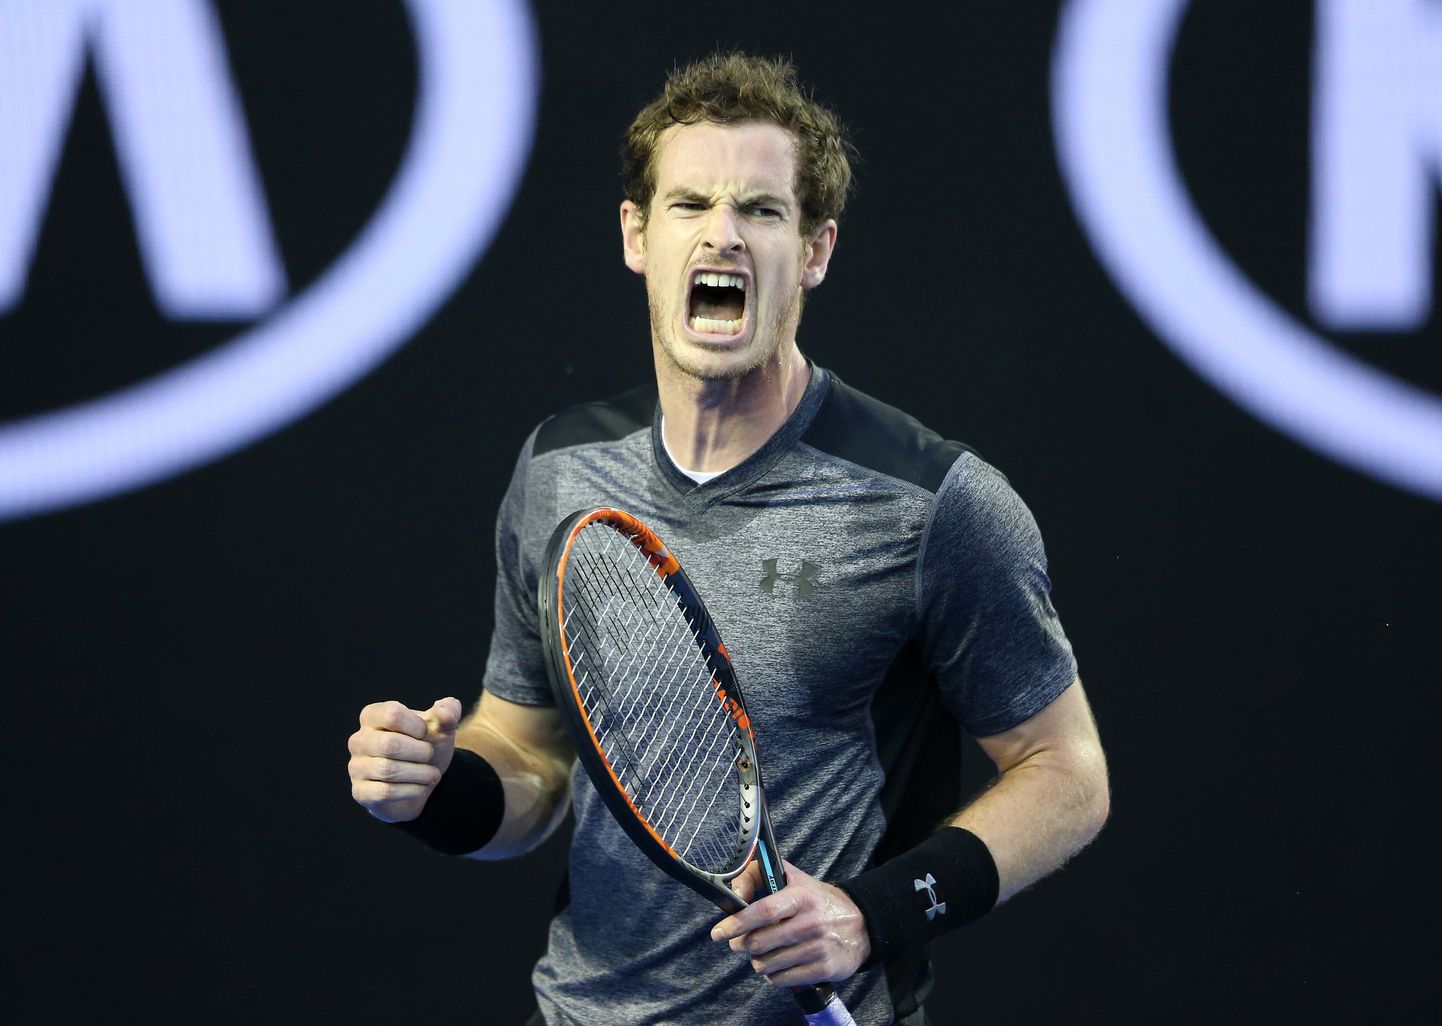 (160125) -- MELBOURNE, Jan. 25, 2016 (Xinhua) -- Andy Murray of Great Britain reacts during the men's singles 4th round match against Bernard Tomic of Australia at the Australian Open Tennis Championships in Melbourne, Australia, on Jan. 25, 2016. (Xinhua/Bi Mingming) (Photo by Xinhua/Sipa USA)